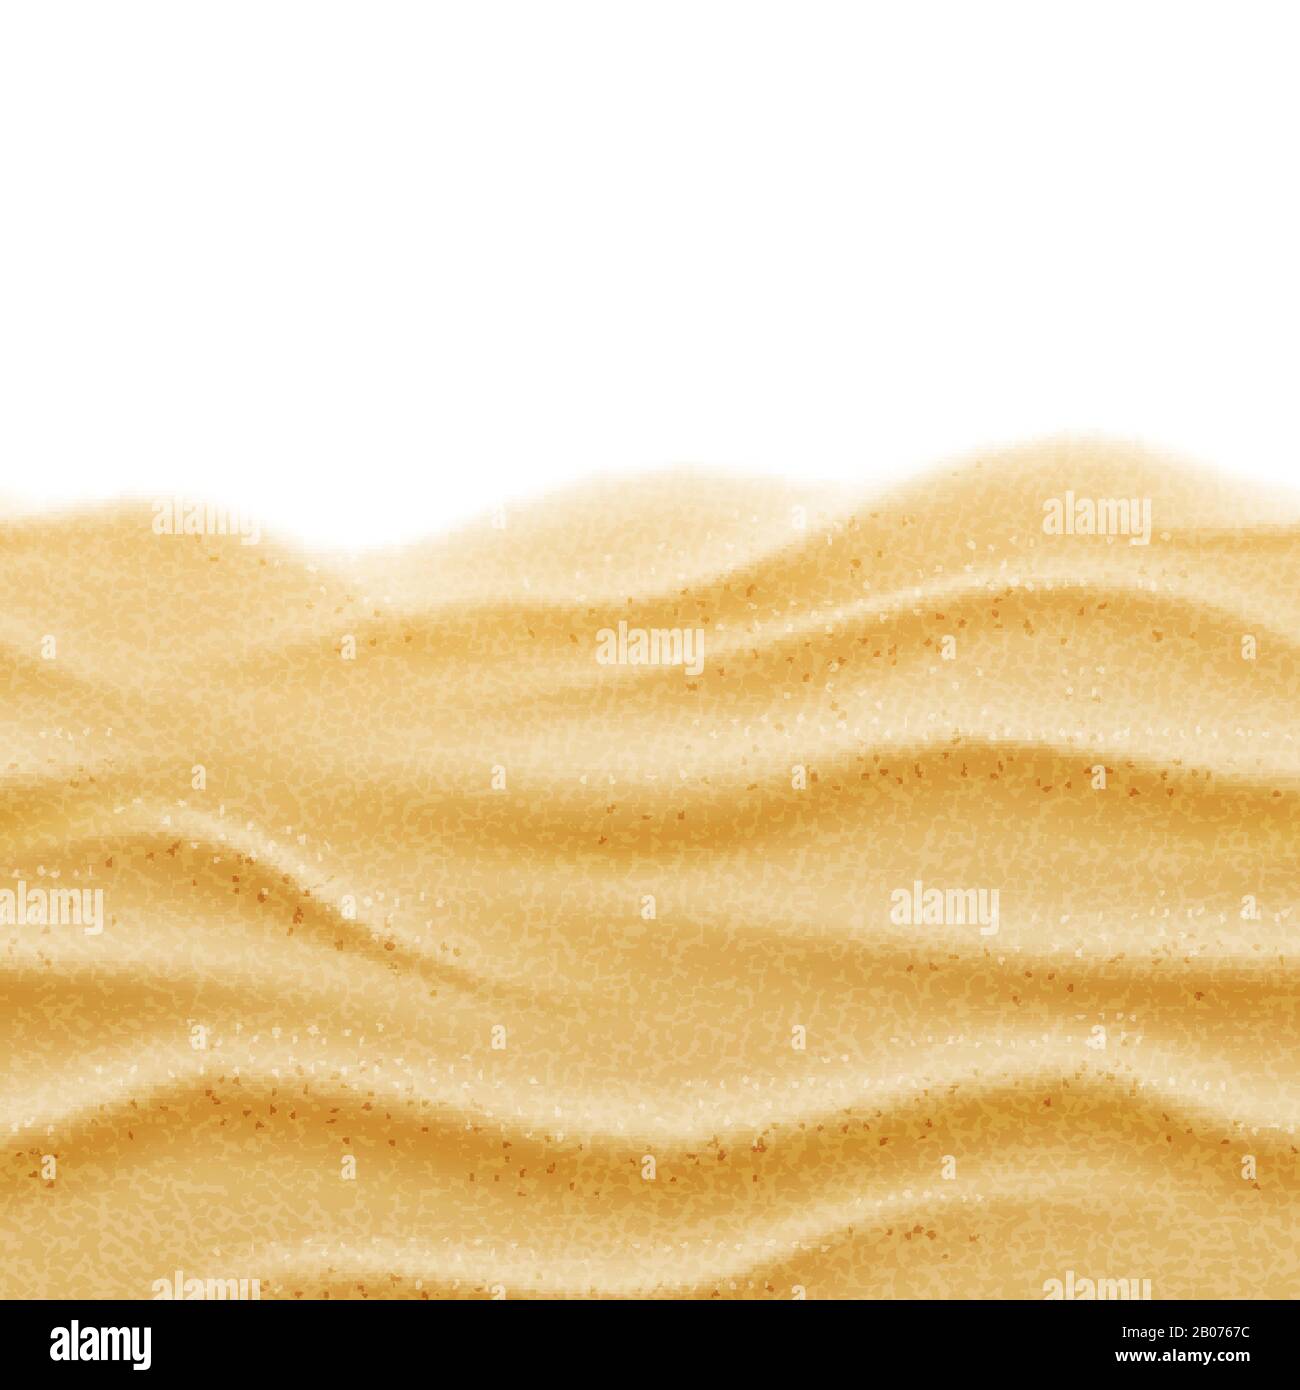 Beach sand seamless vector texture background. Natural sand wave illustration Stock Vector